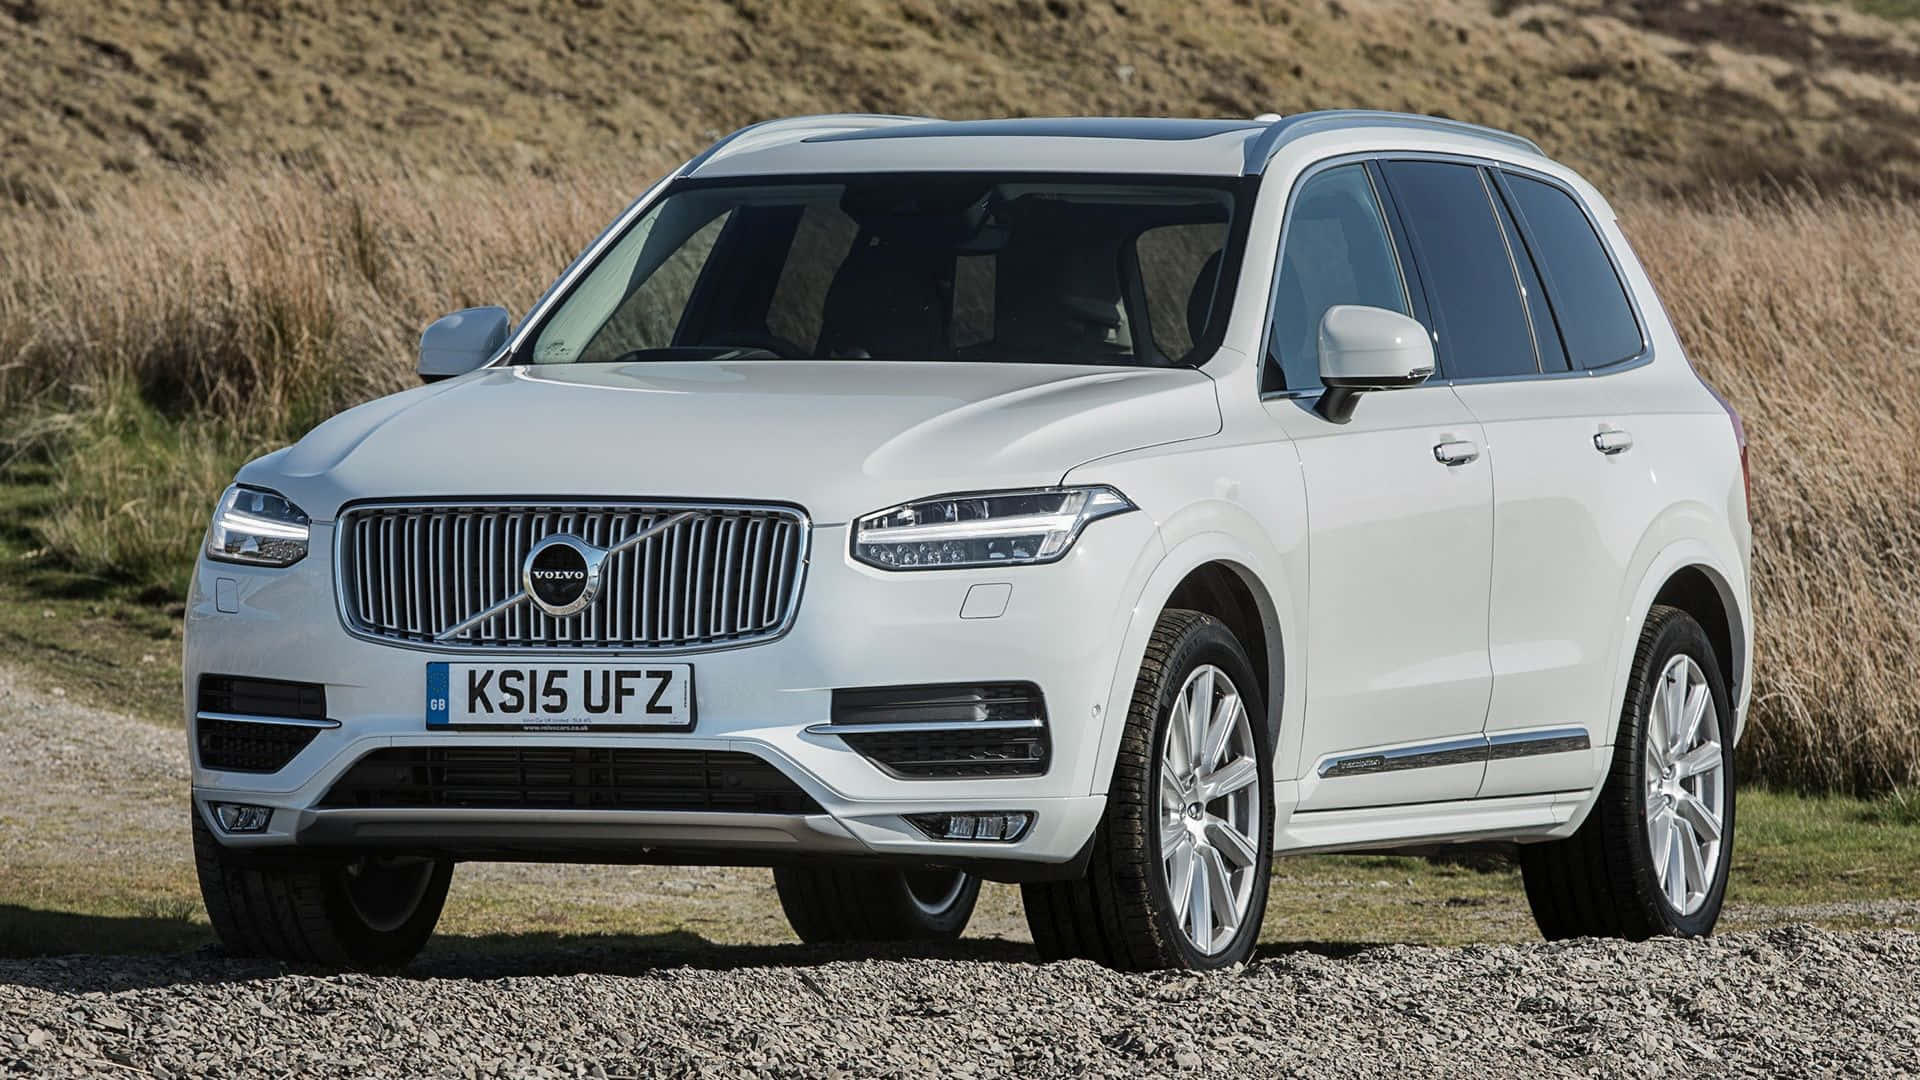 The Majestic Volvo Xc90 In A Harmonic Natural Environment Wallpaper